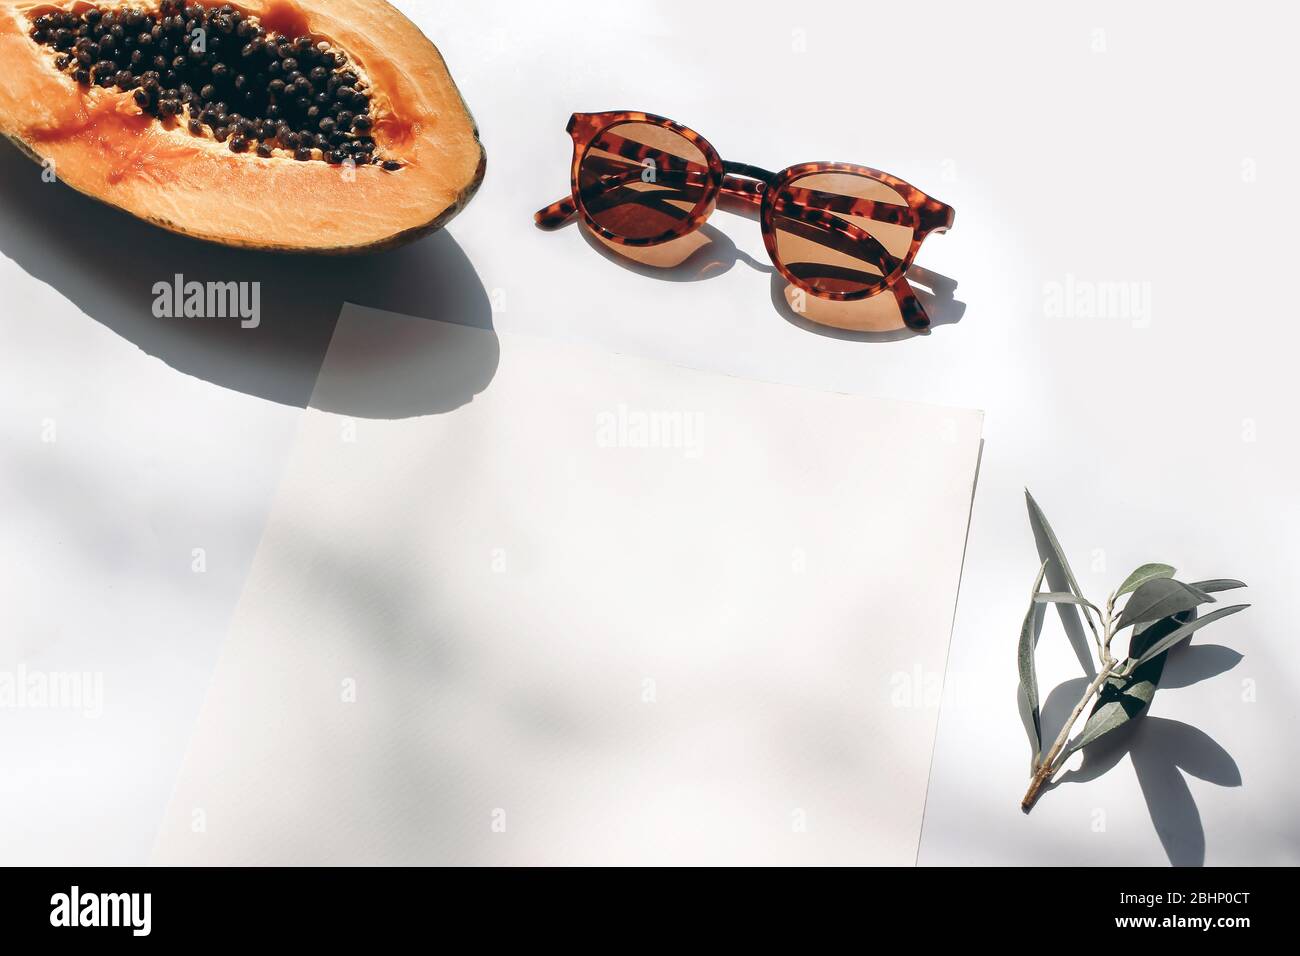 Summer stationery still life scene. Closeup of cut papaya fruit, olive branch and sunglasses in sunlight. White table. Blank paper cards, invitations Stock Photo